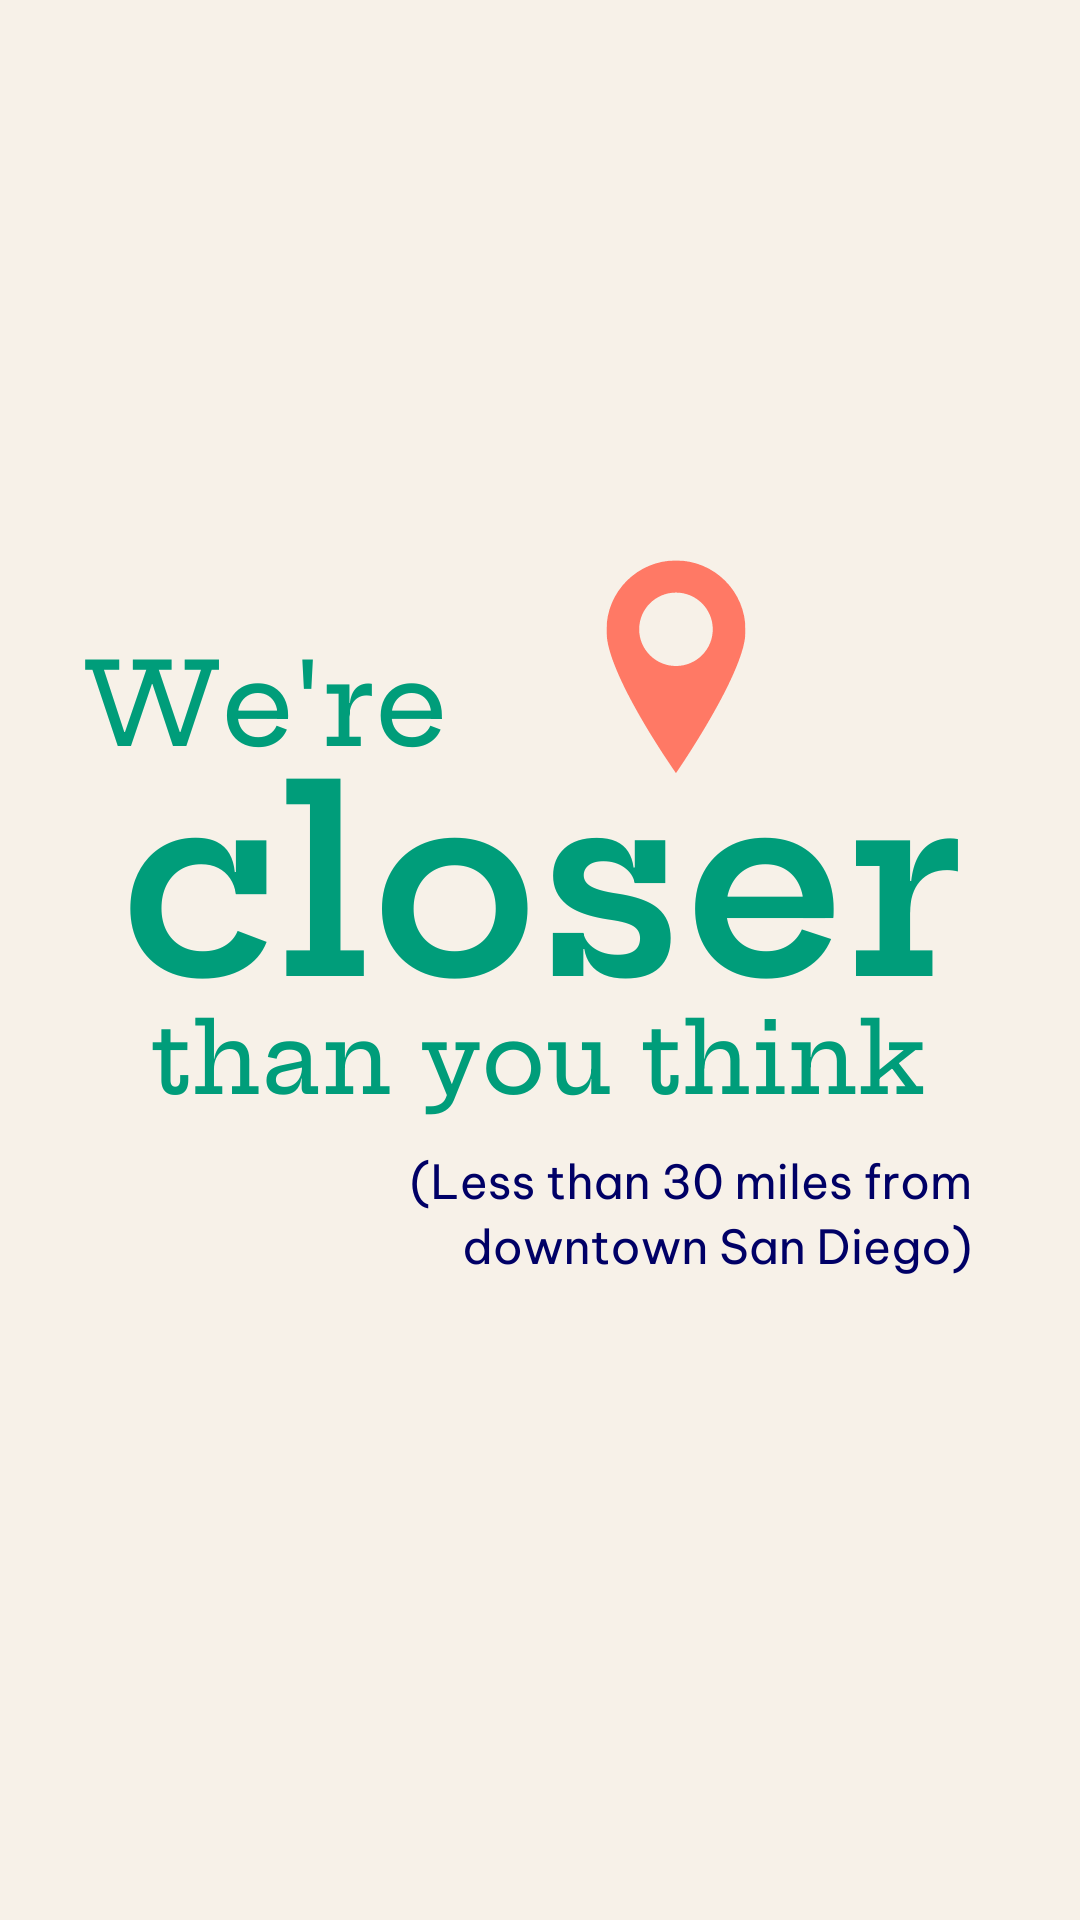 We're closer than you think (Escondido is only 30 miles from downtown San Diego)